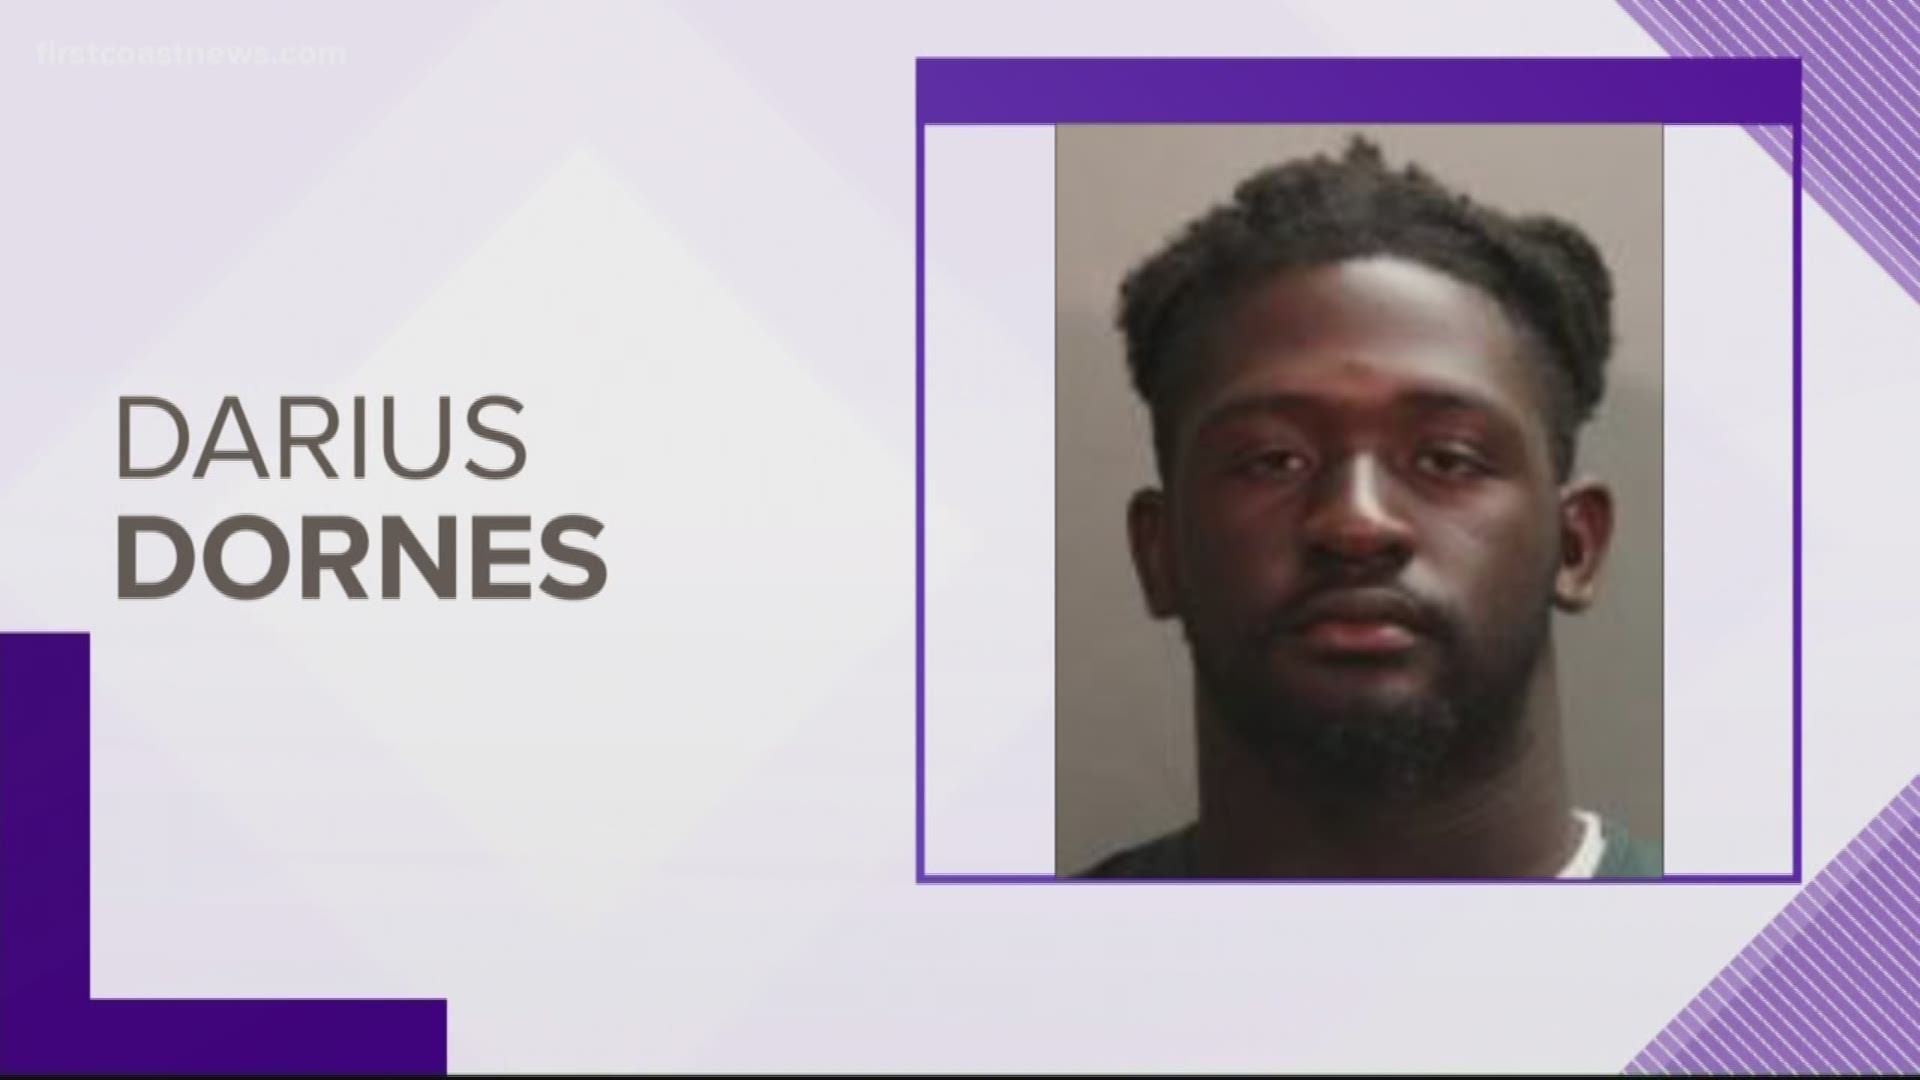 Darius Dornes is suspected of violently attacking a woman in an attempted sexual battery outside a Jacksonville Beach bar.